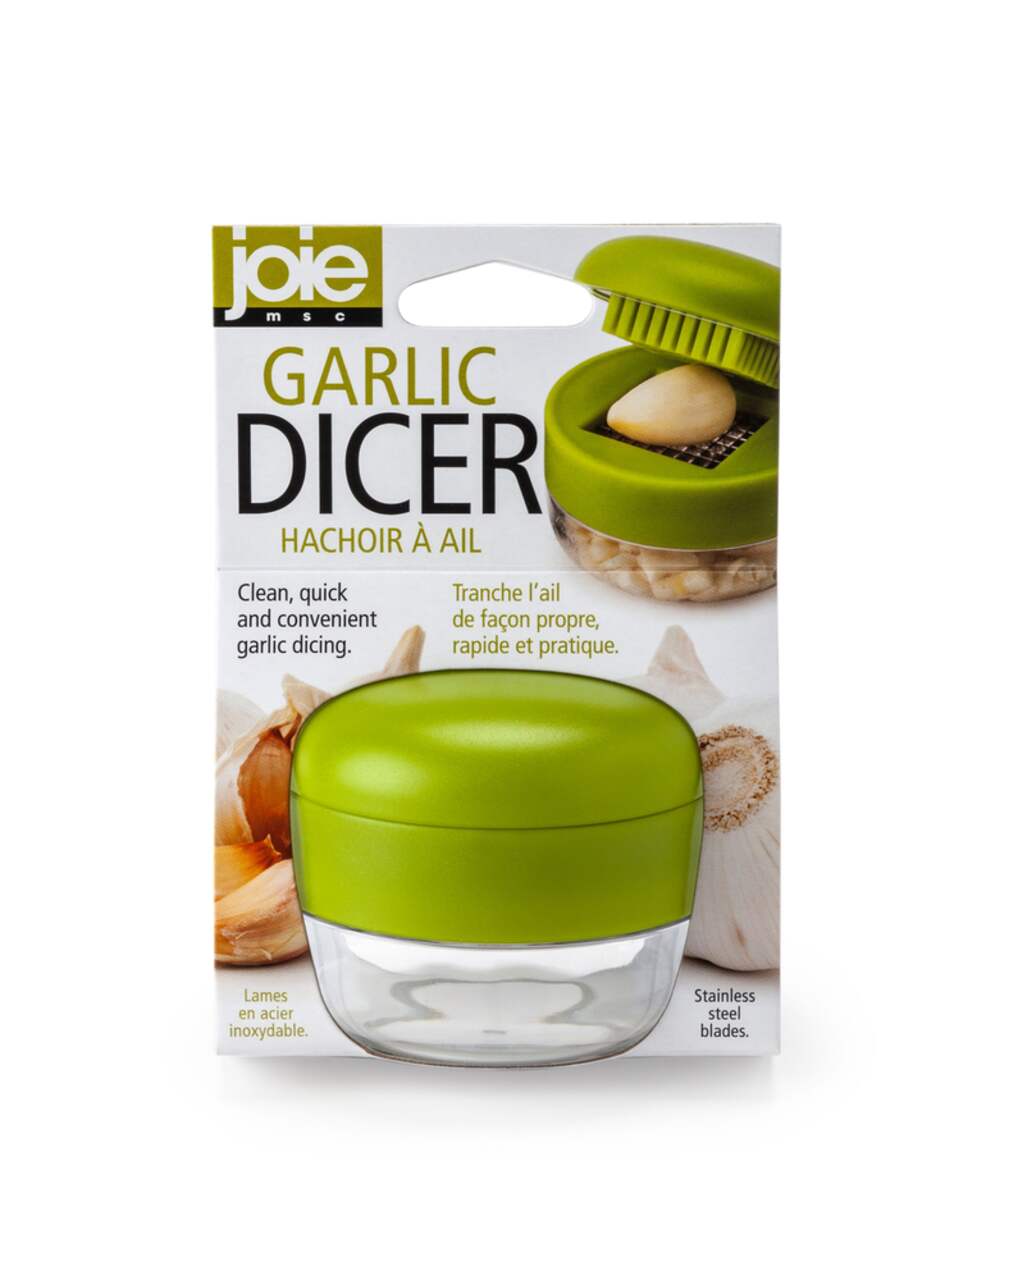 https://media-www.canadiantire.ca/product/living/kitchen/kitchen-tools-thermometers/1426651/joie-garlic-dicer-1b5bd2a9-2d0b-4f80-9988-1595f685574f.png?imdensity=1&imwidth=1244&impolicy=mZoom